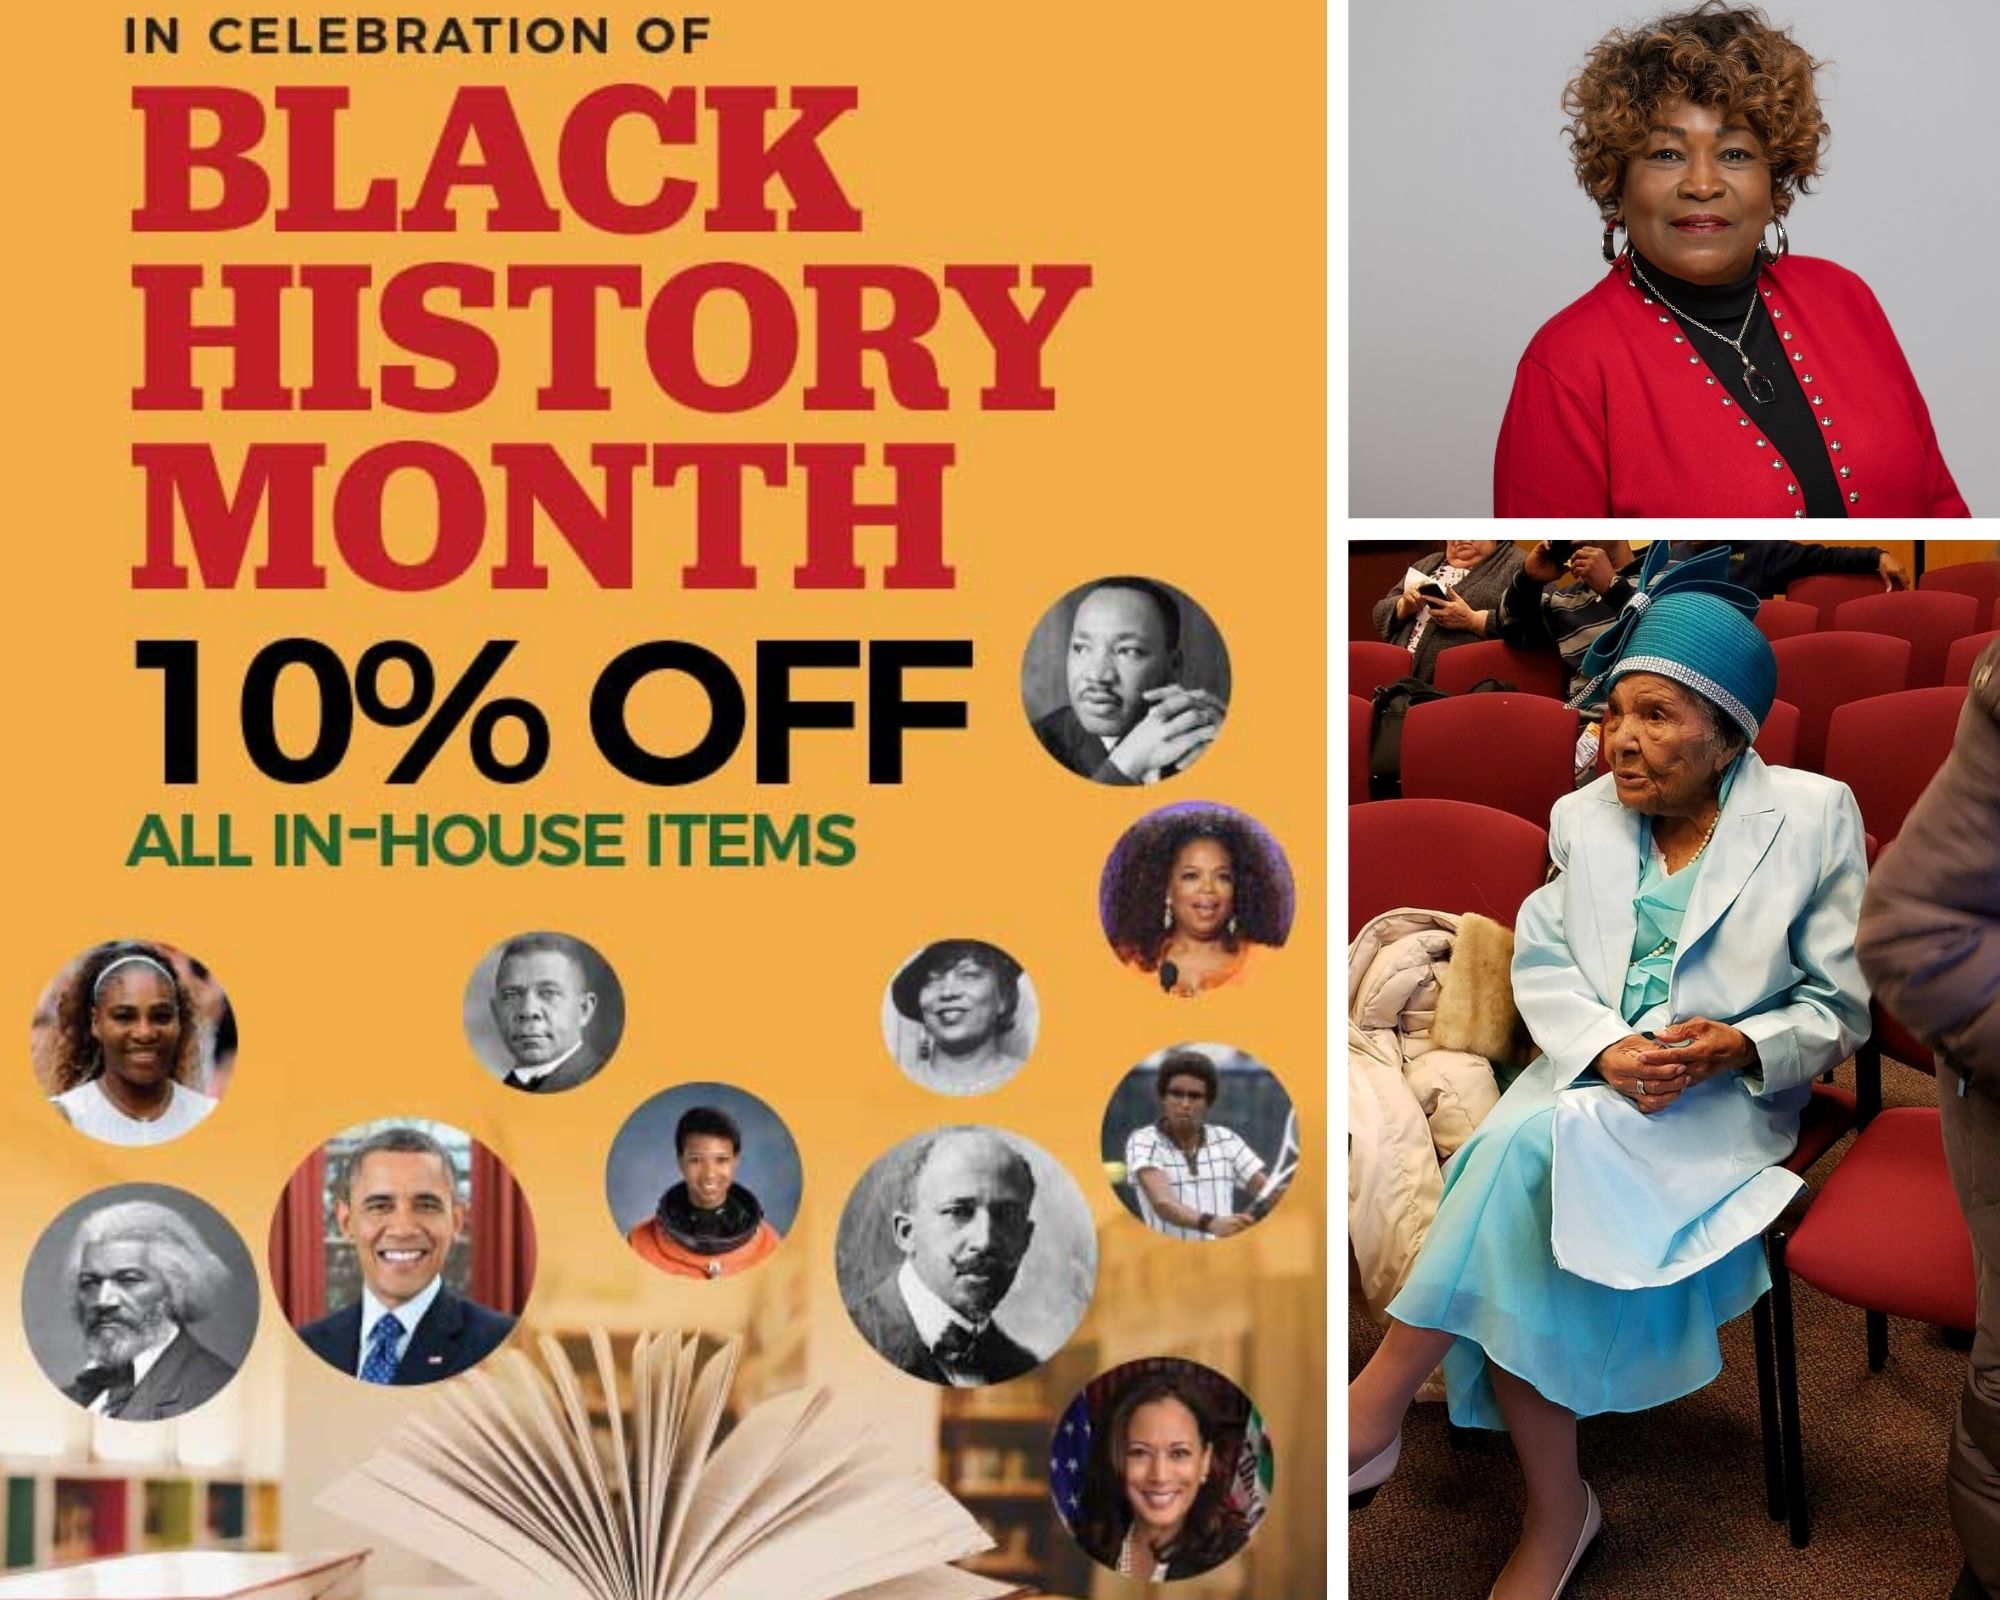 fastsigns 10 percent off for black history month